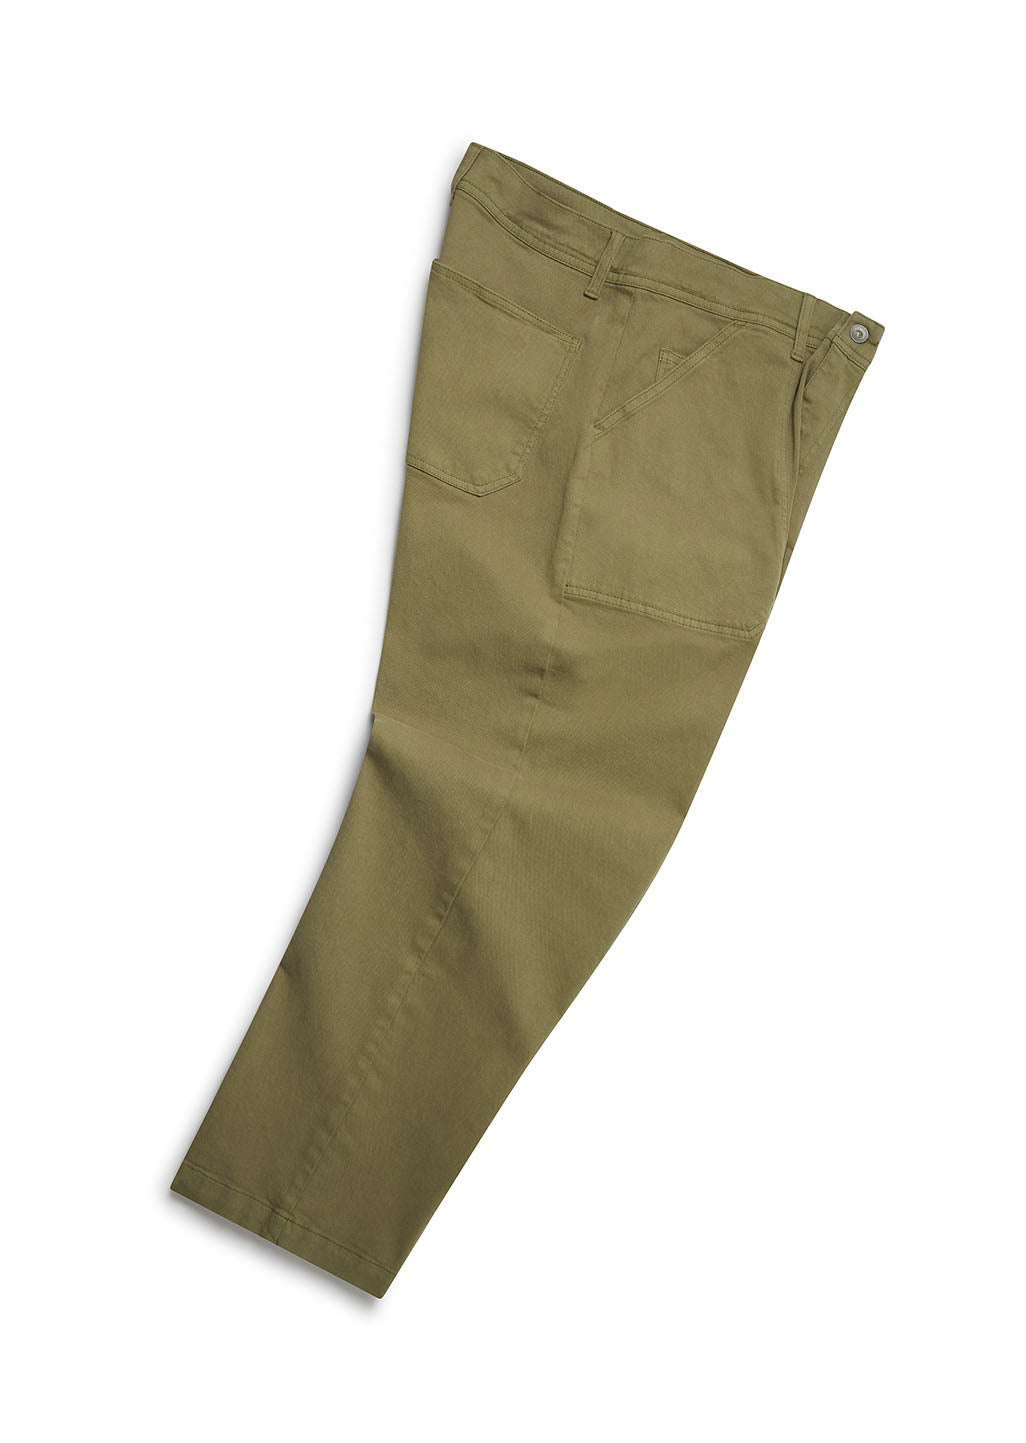 Gd Work Pant in Sage